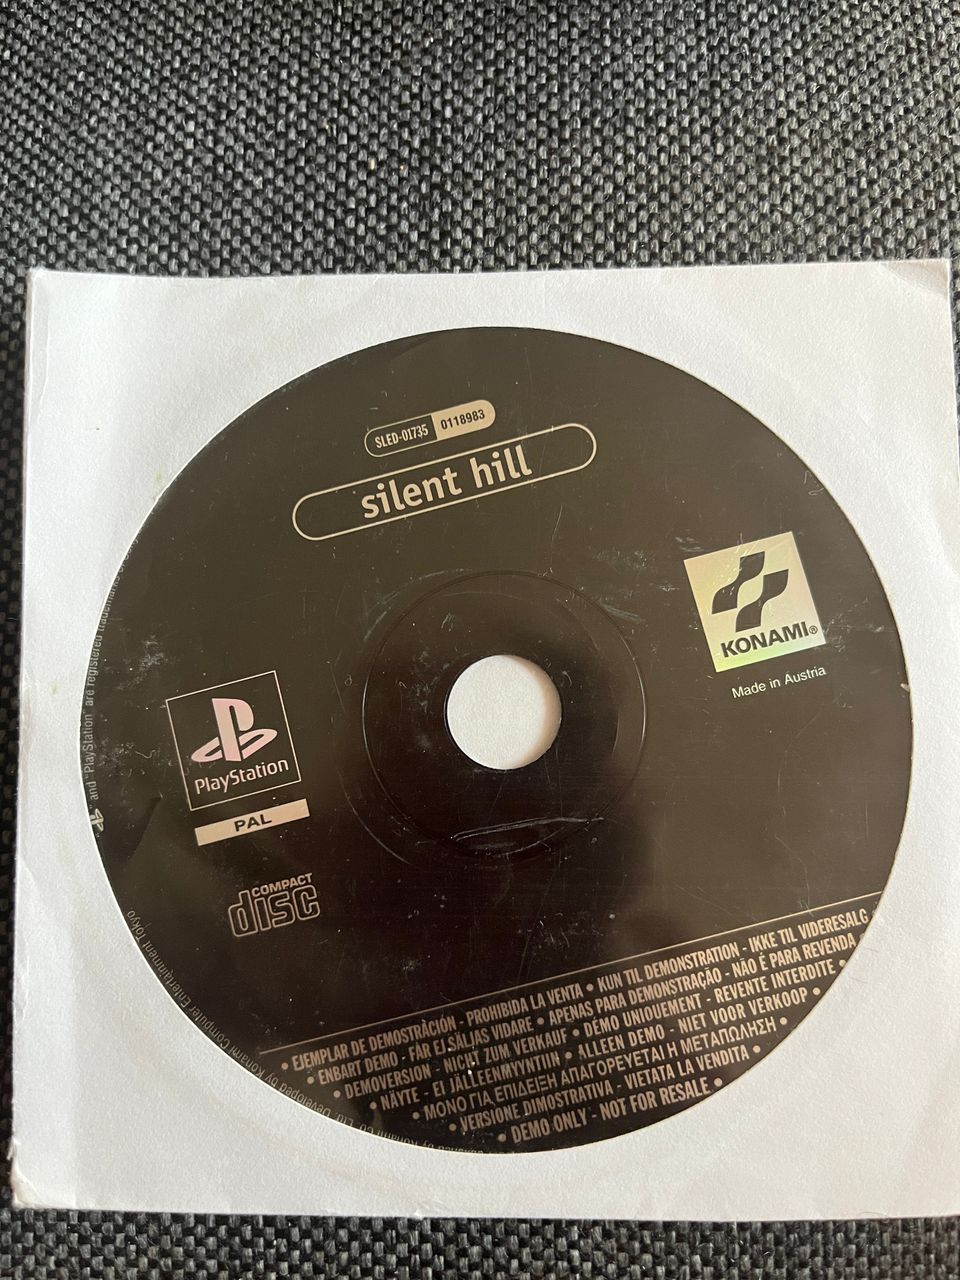 Silent hill demo ps